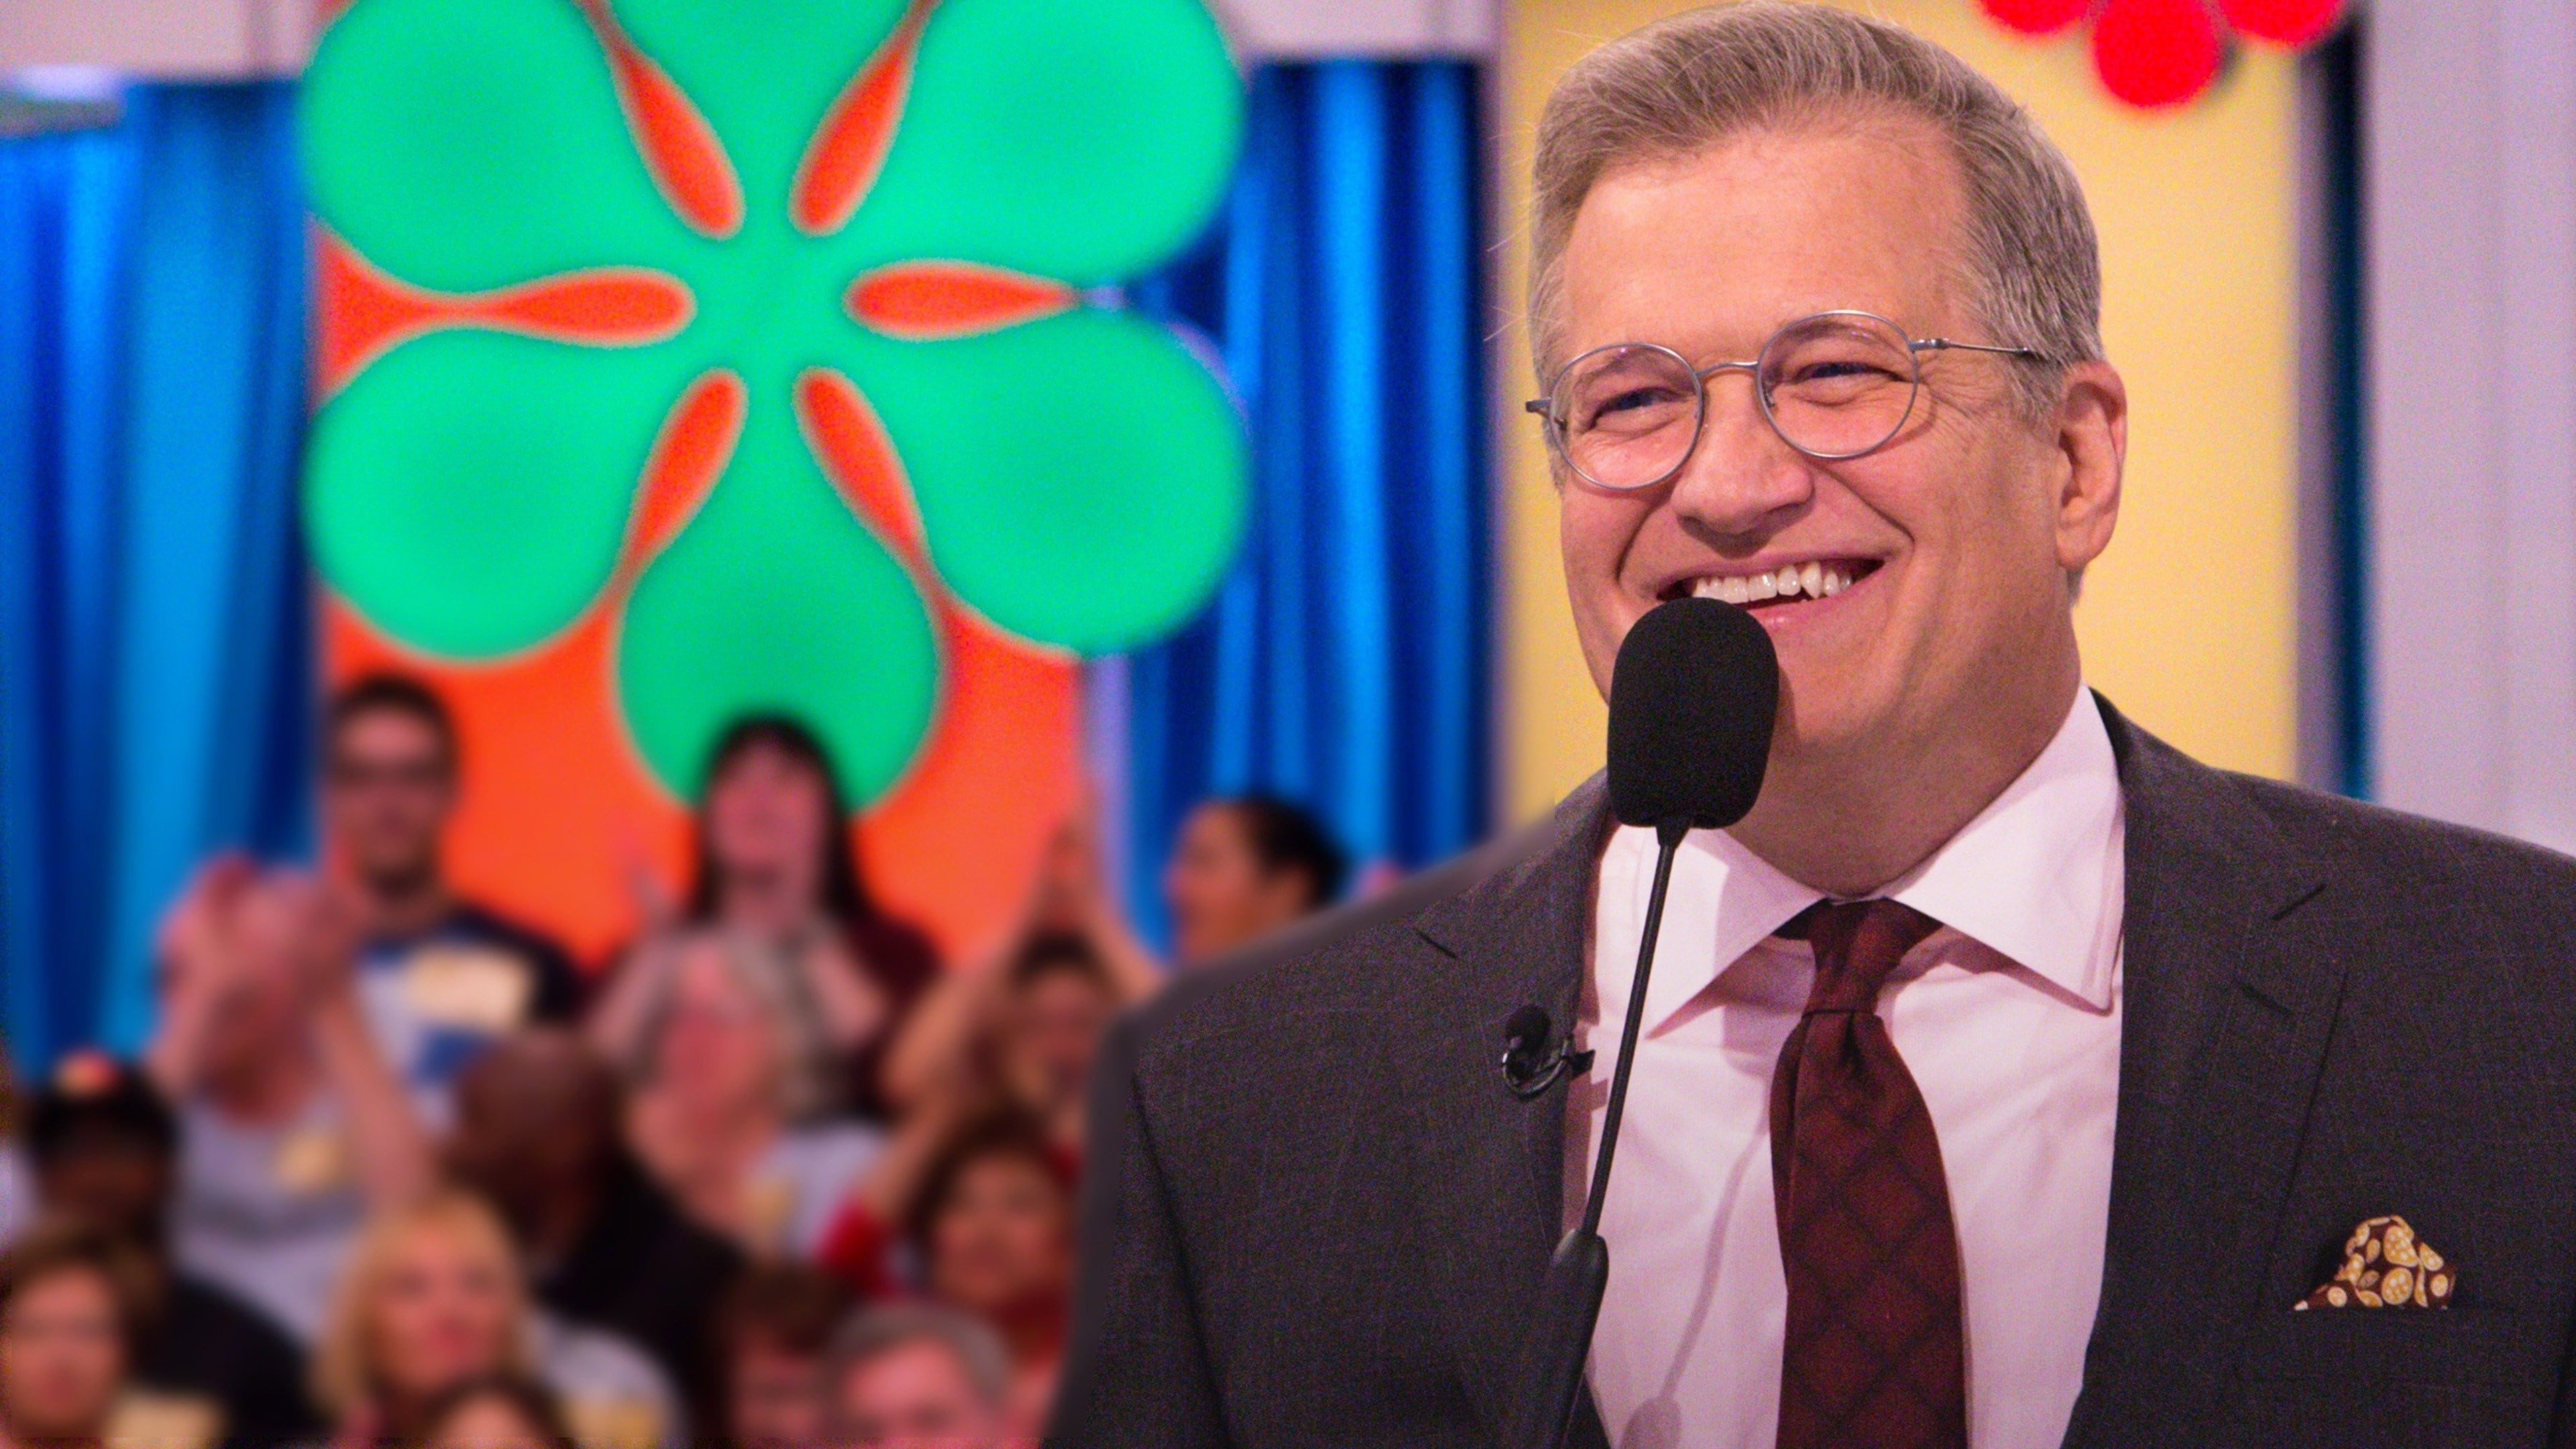 The Price Is Right - Season 1 Episode 197 : The Price Is Right Season 1 Episode 197